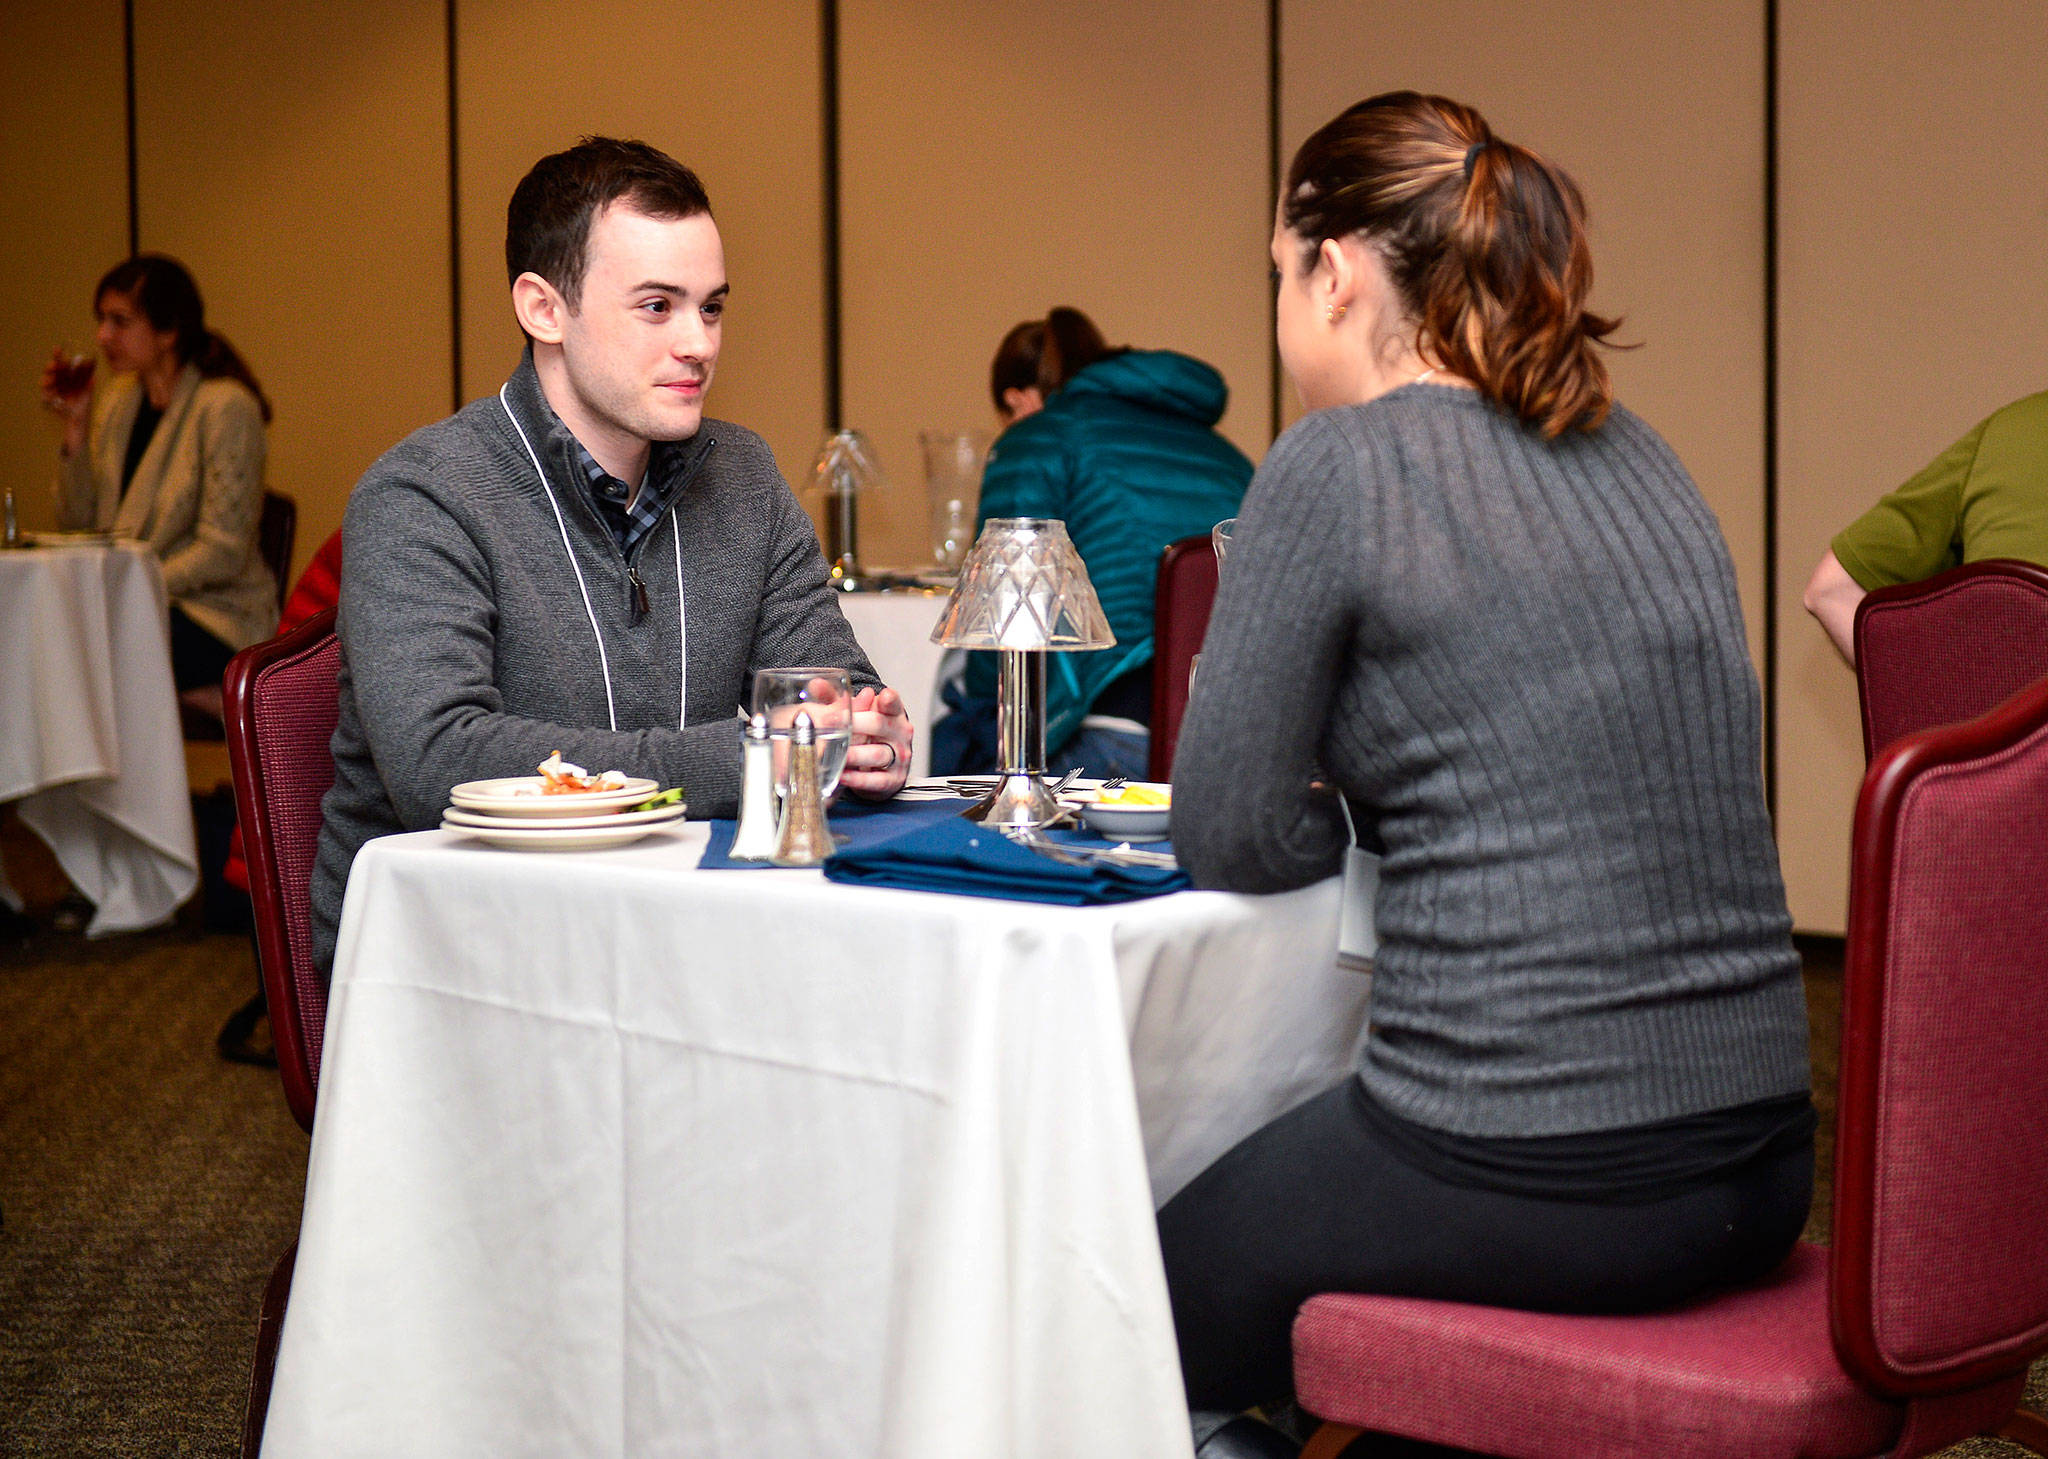 &lt;em&gt;Personnel Specialist 2nd Class Nicholas Wozniak, from Orlando, Florida, assigned to the aircraft carrier USS Nimitz (CVN 68), eats lunch with his wife at a Chaplains Religious Enrichment Development Operation marriage enrichment workshop on March 24.&lt;/em&gt;                                Mass Communication Specialist Seaman Greg Hall / U.S. Navy